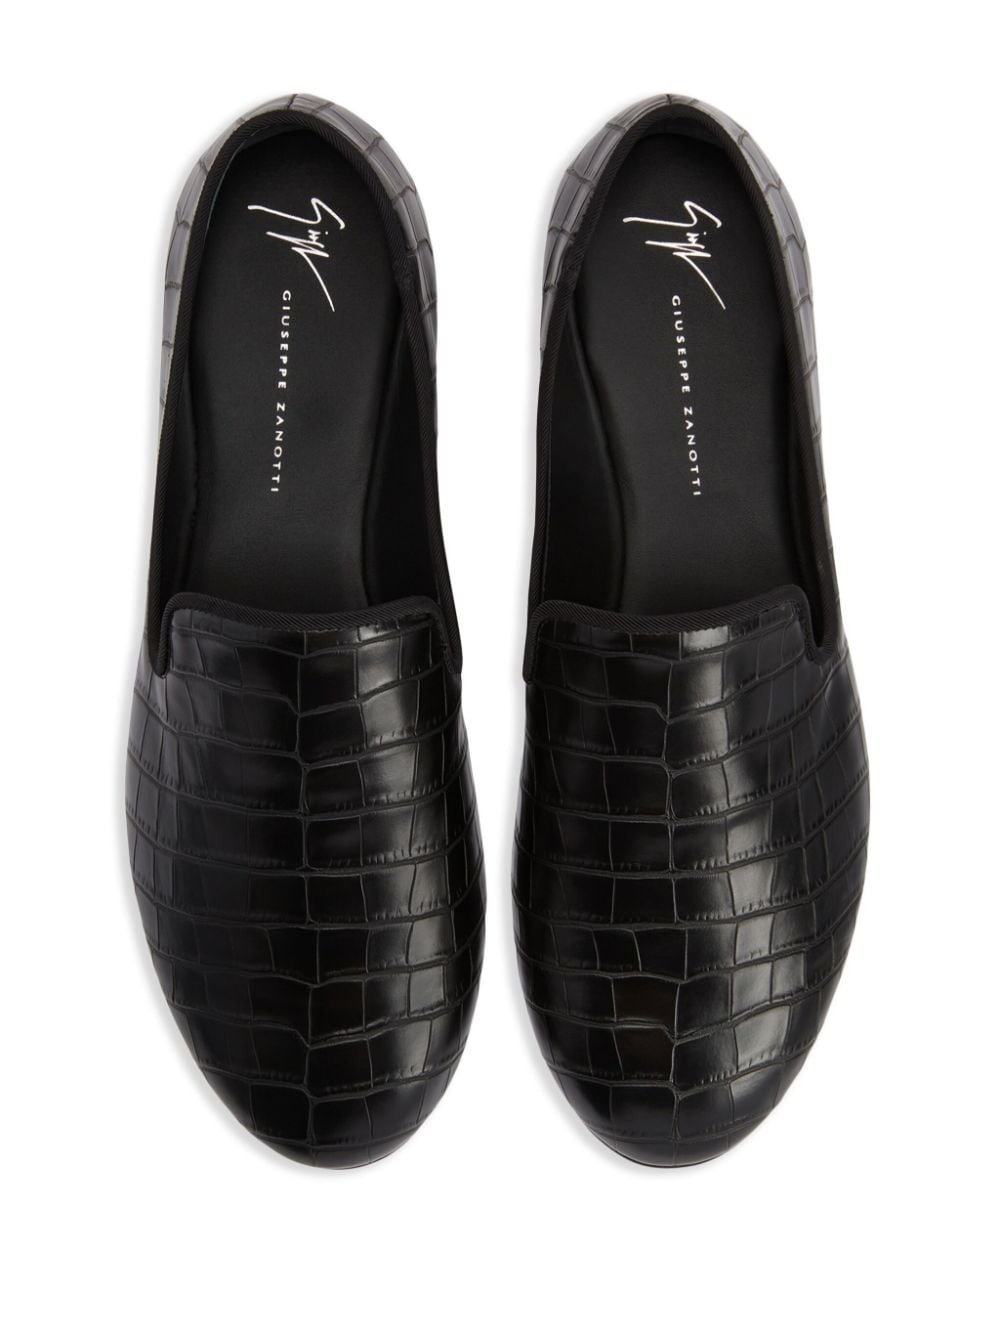 Seymour embossed leather loafers - 4